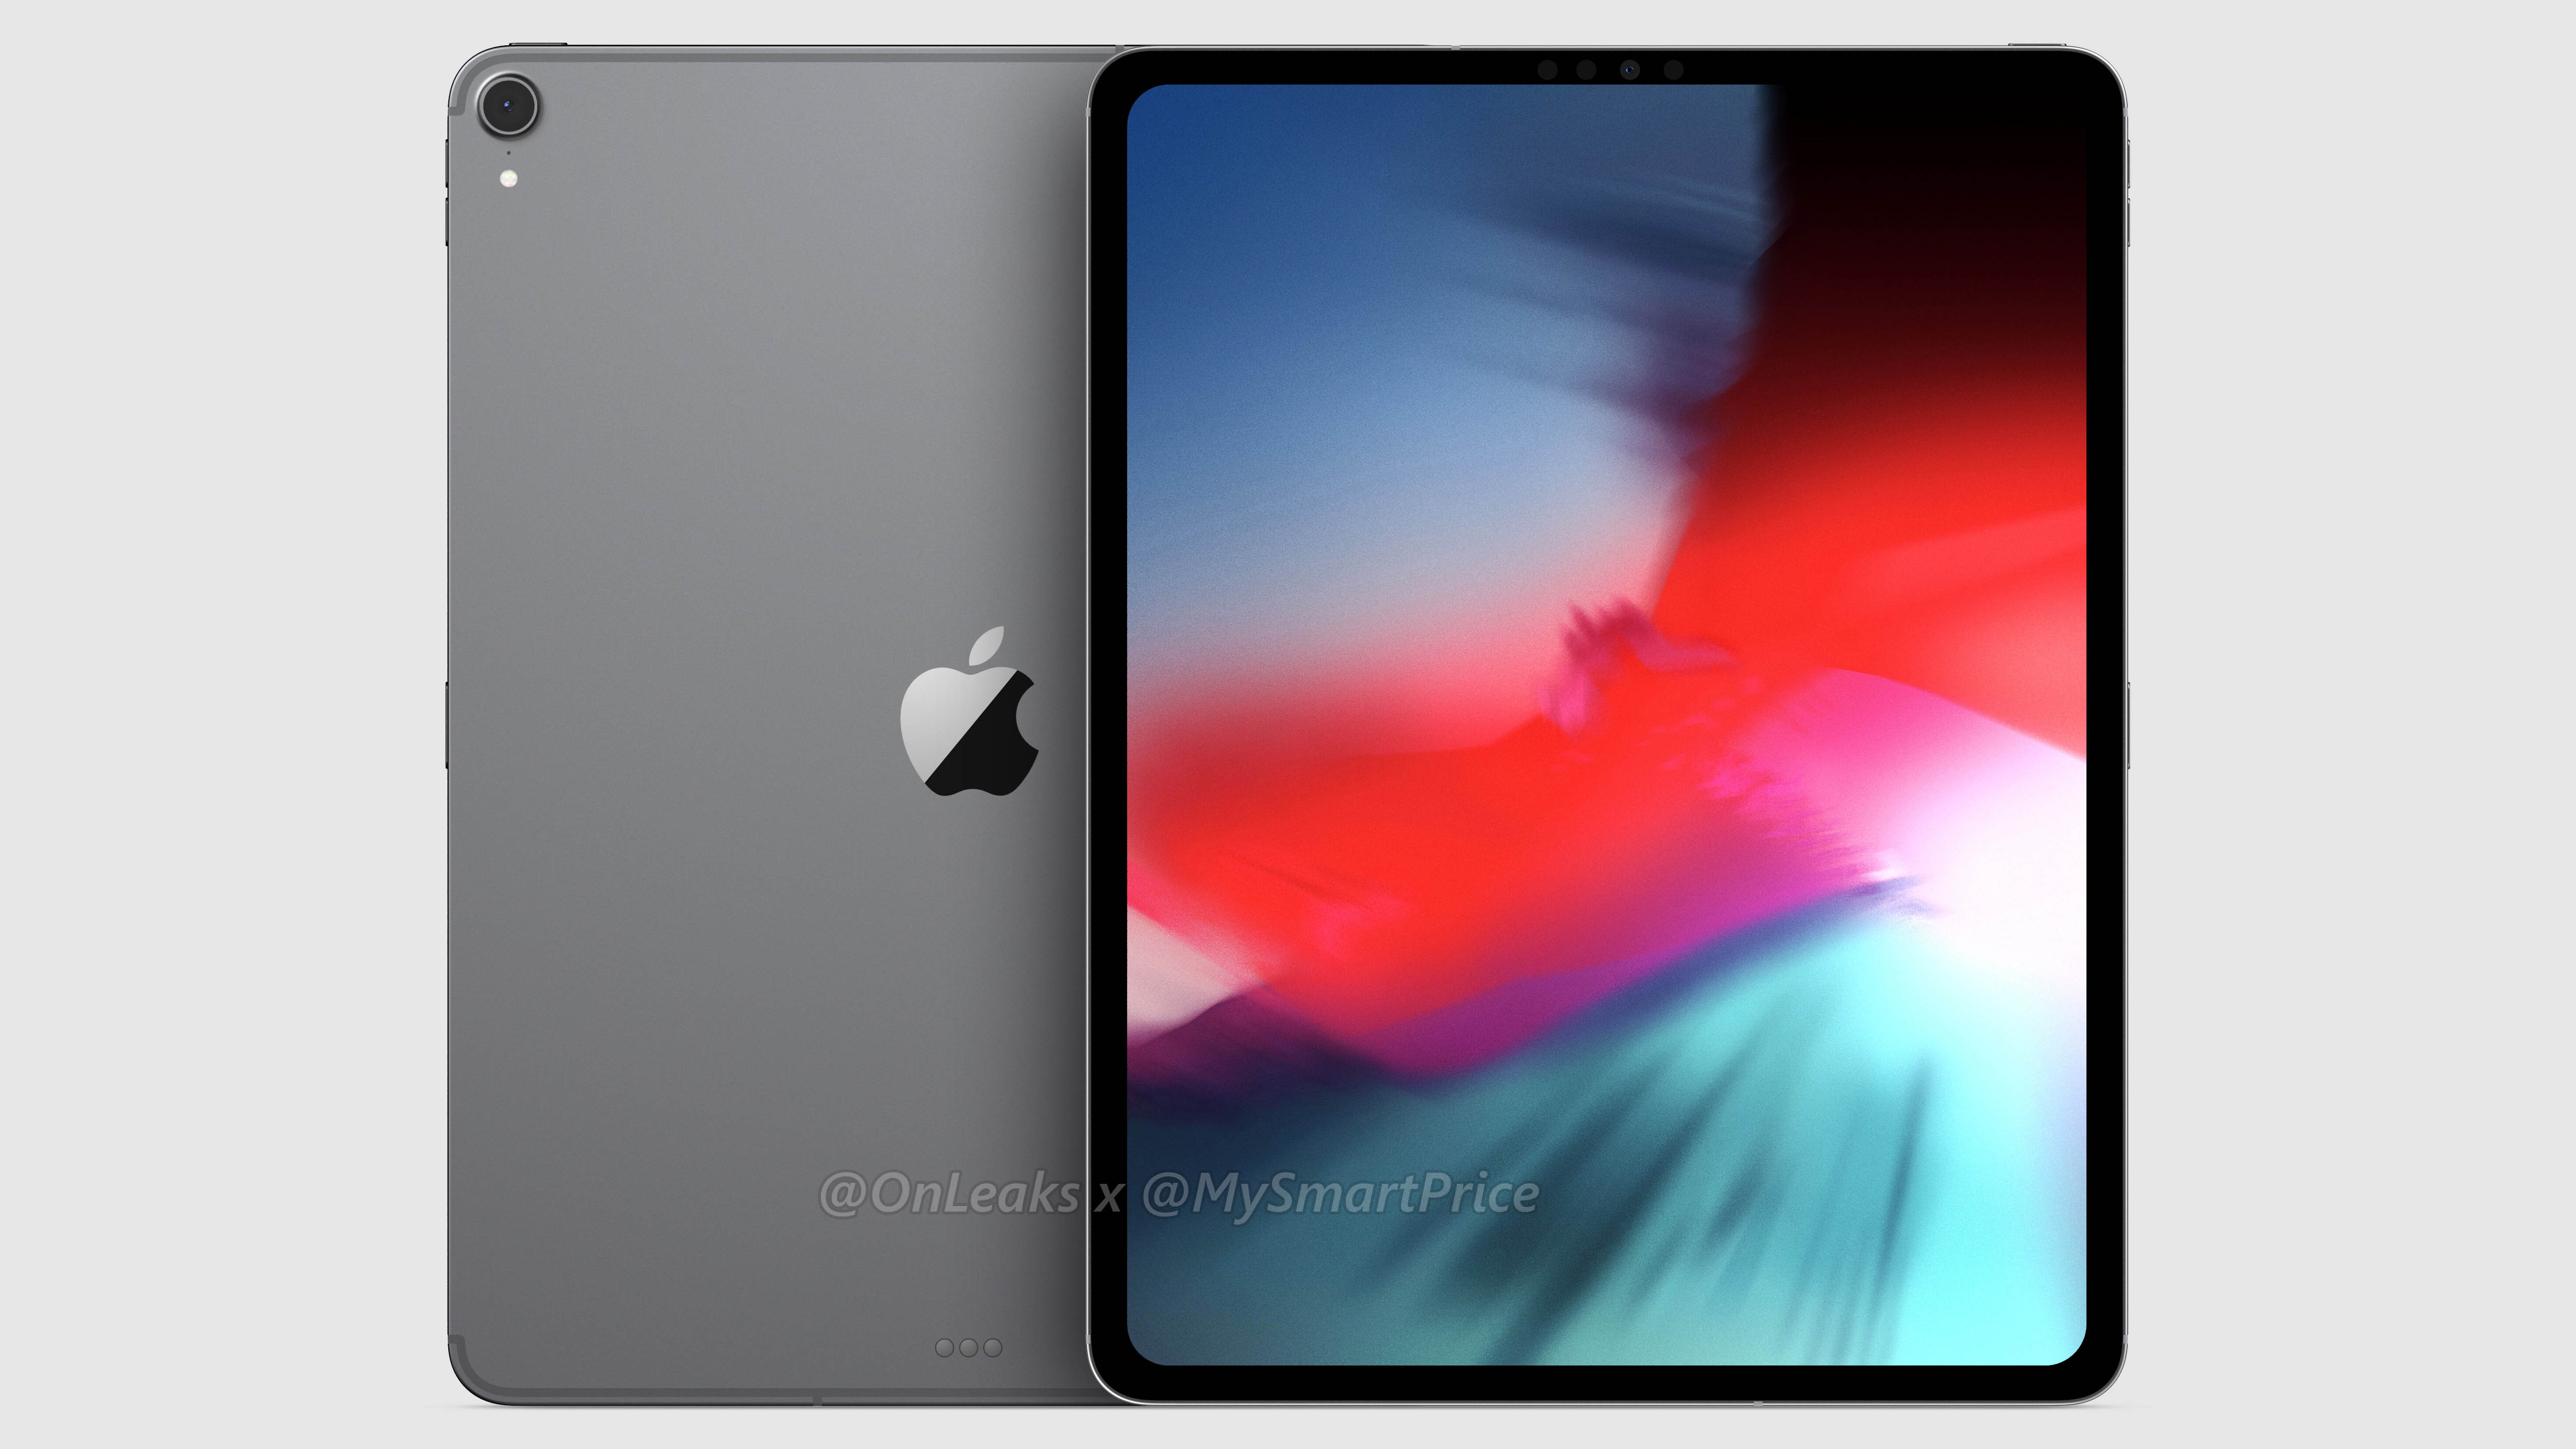 Ipad Pro Home Button Renderings show thin-bezeled iPad Pro with no Home button or notch